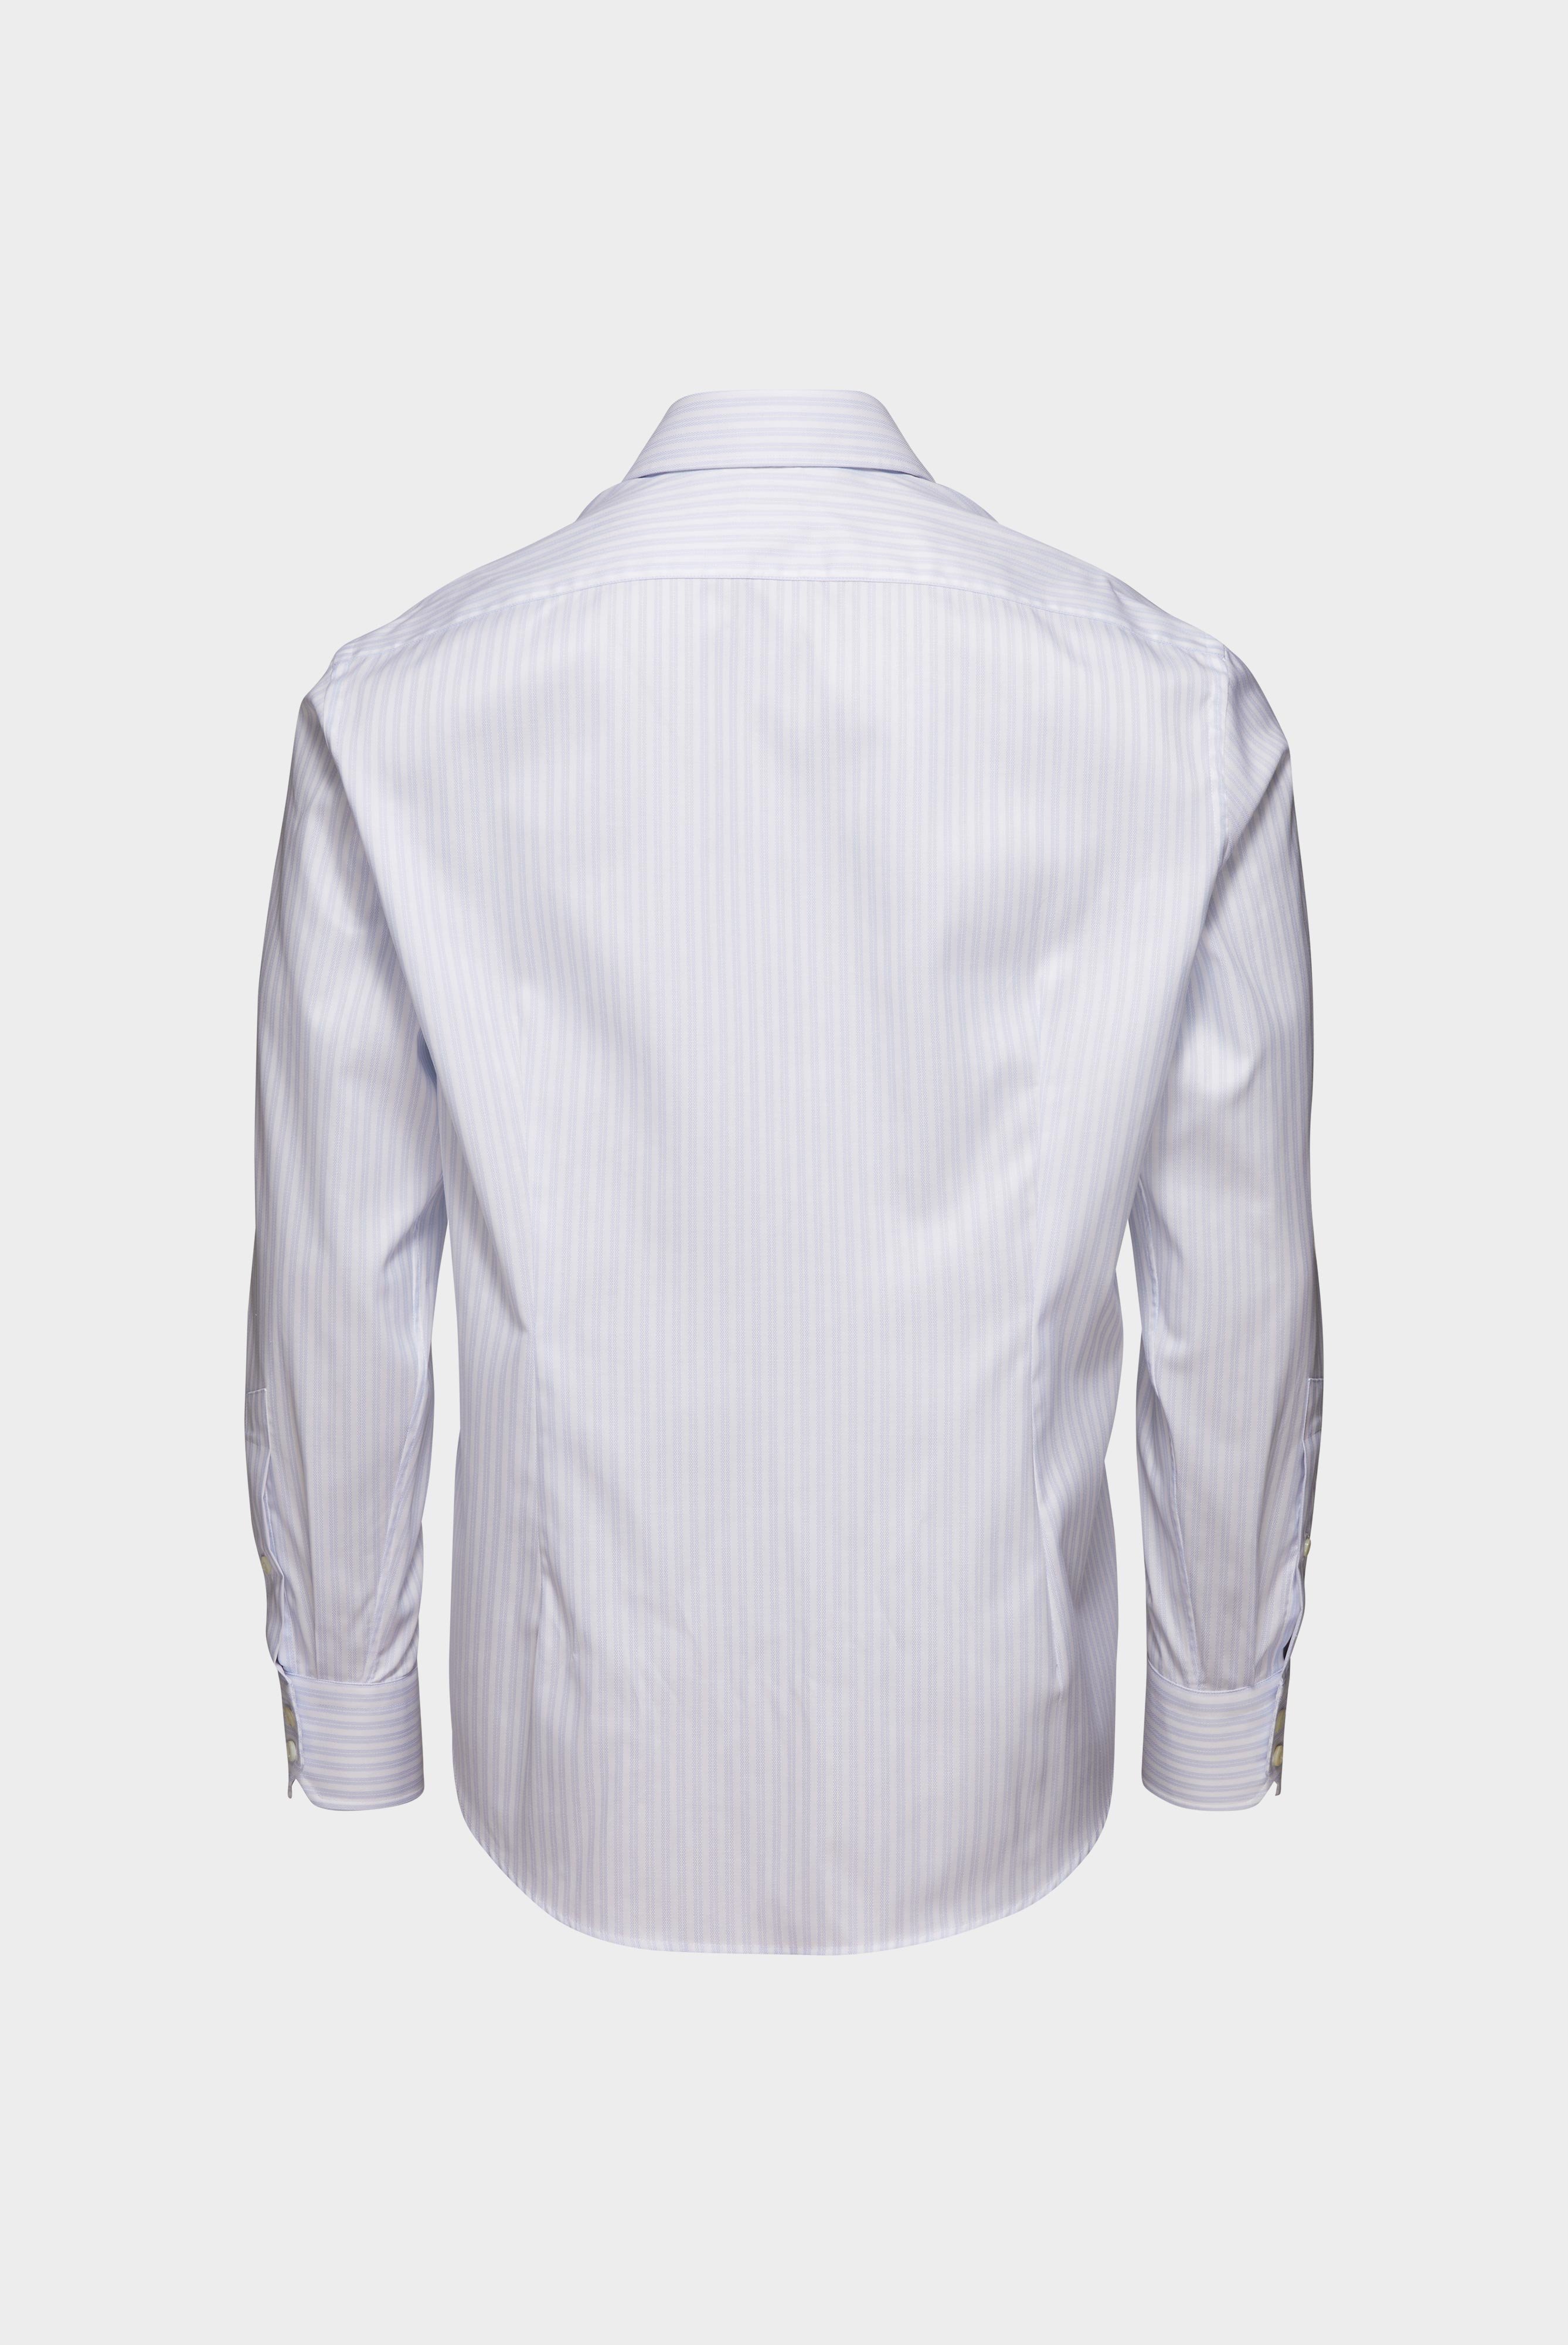 Easy Iron Shirts+Striped Wrinkle Free Shirt Tailor Fit+20.2020.BQ.161106.007.39